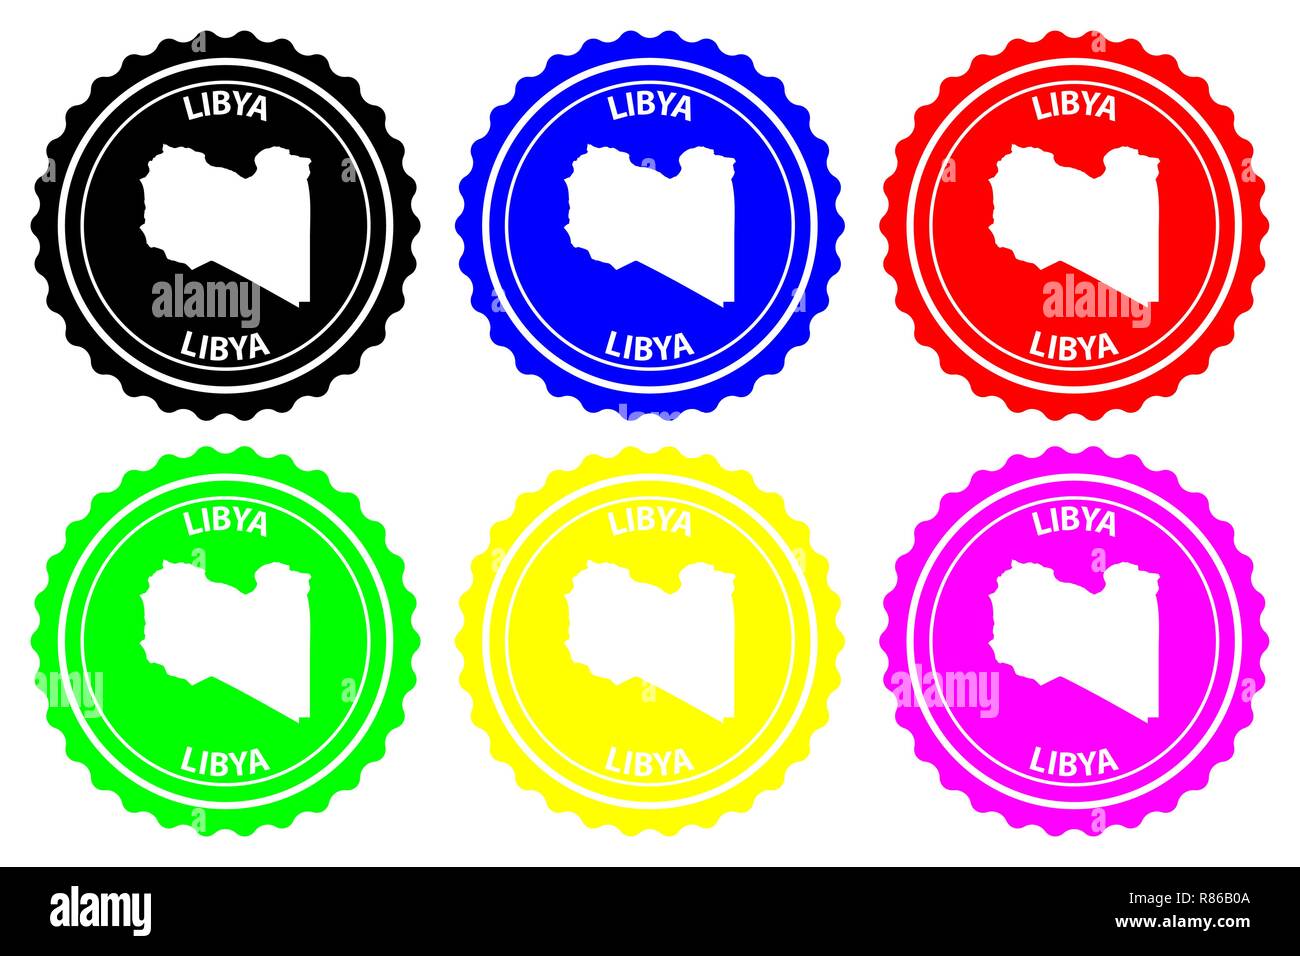 Libya - rubber stamp - vector, State of Libya map pattern - sticker - black, red, blue, green, yellow, purple Stock Vector